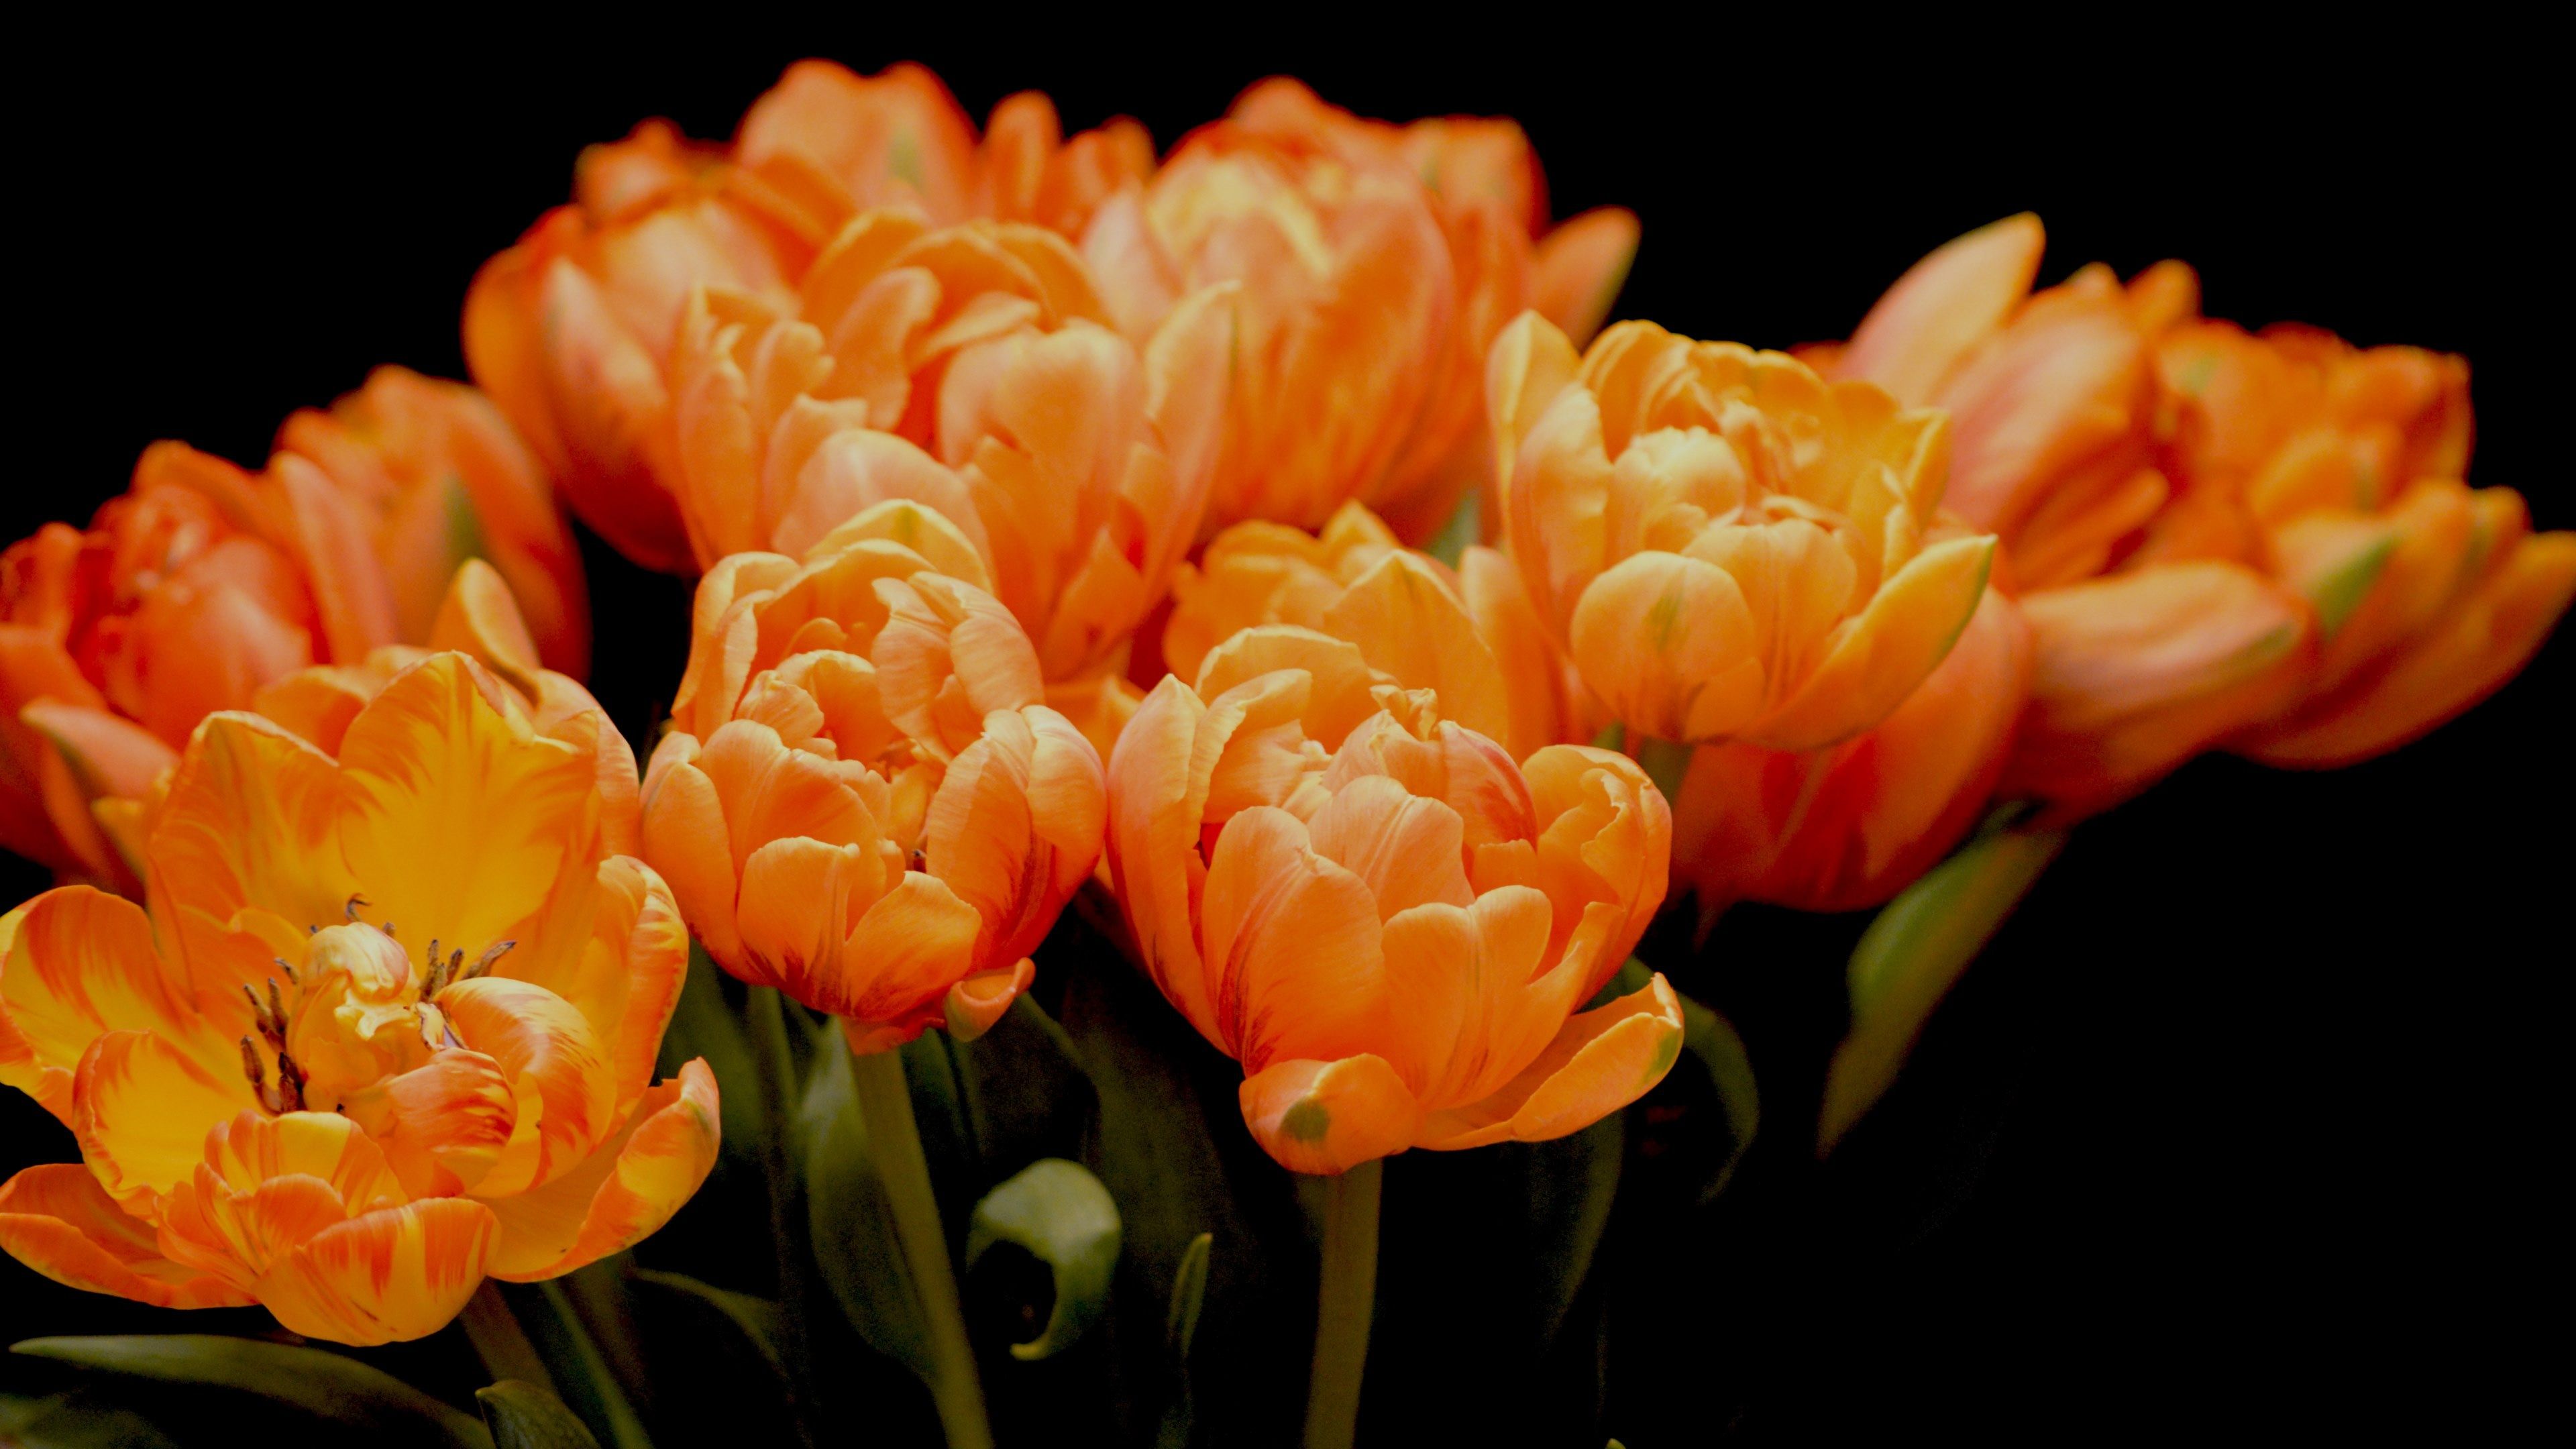 Wallpaper / a bouquet of bright orange tulips against a black background, tulips 4k wallpaper free download